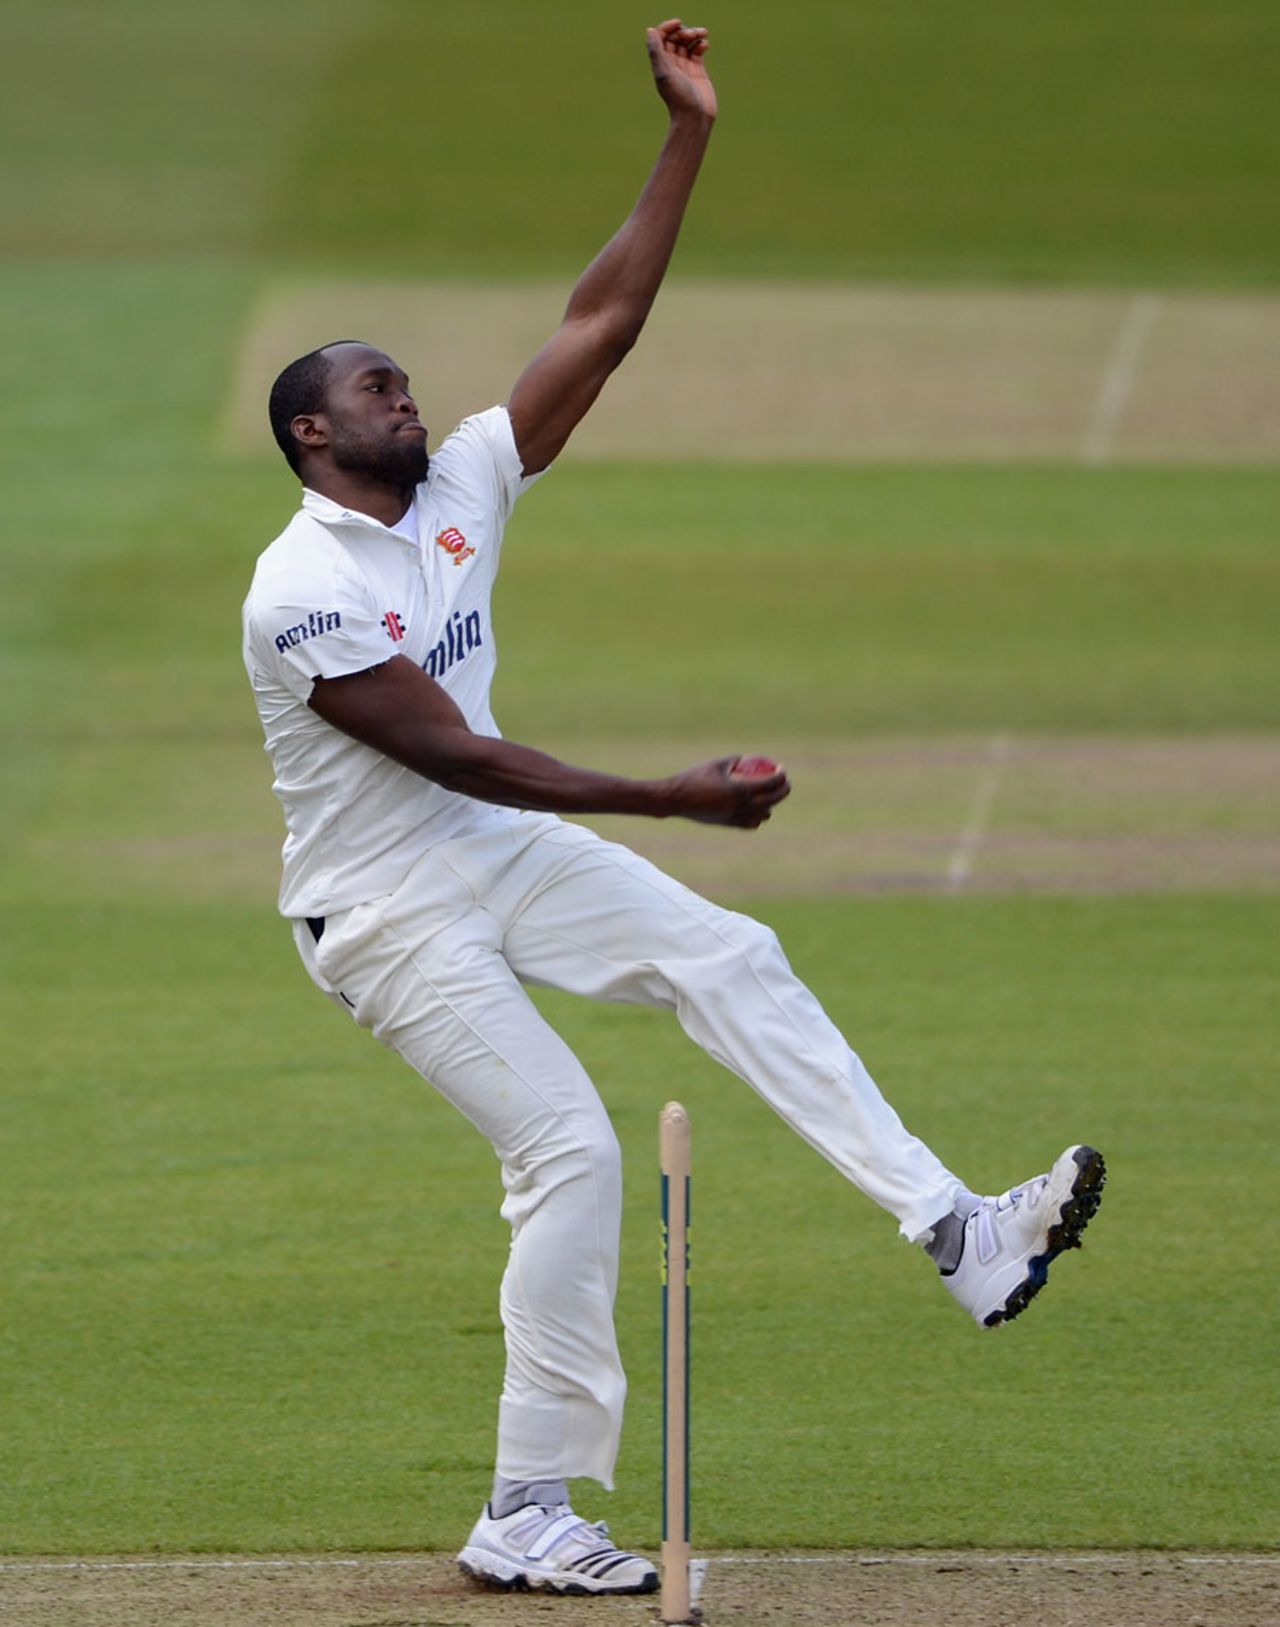 Maurice Chambers ended the Yorkshire first innings with the wicket of Steven Patterson, Yorkshire v Essex, County Championship, Division Two, Headingley, April 20, 2012